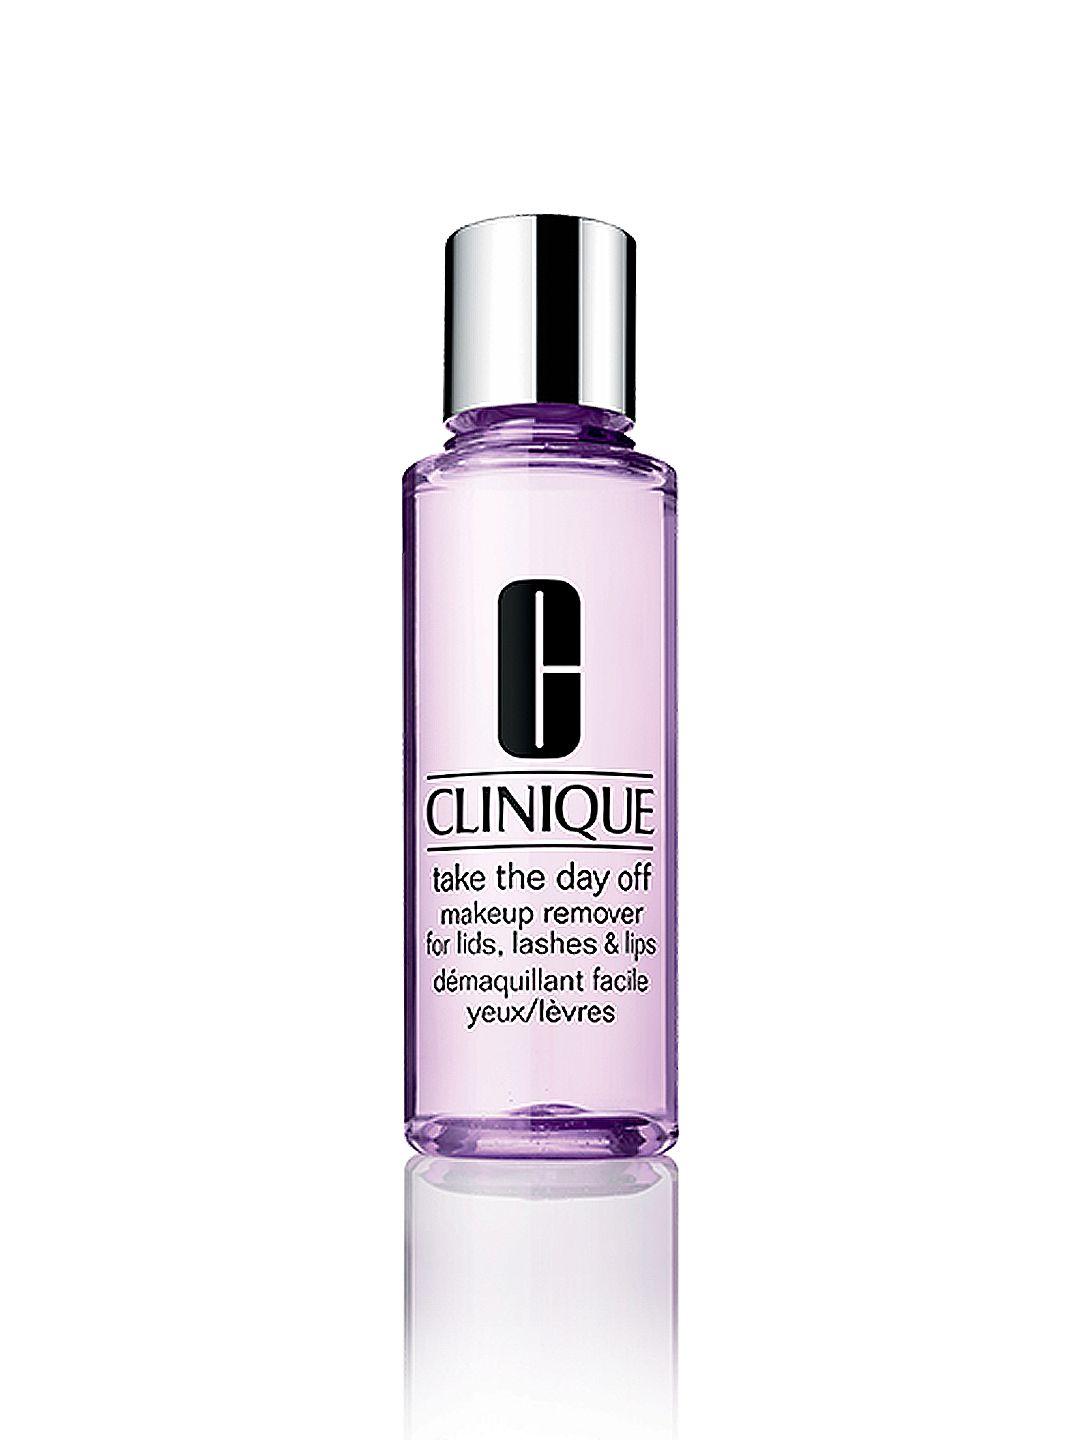 clinique-take-the-day-off-for-lids,-lashes-&-lips-makeup-remover-125ml